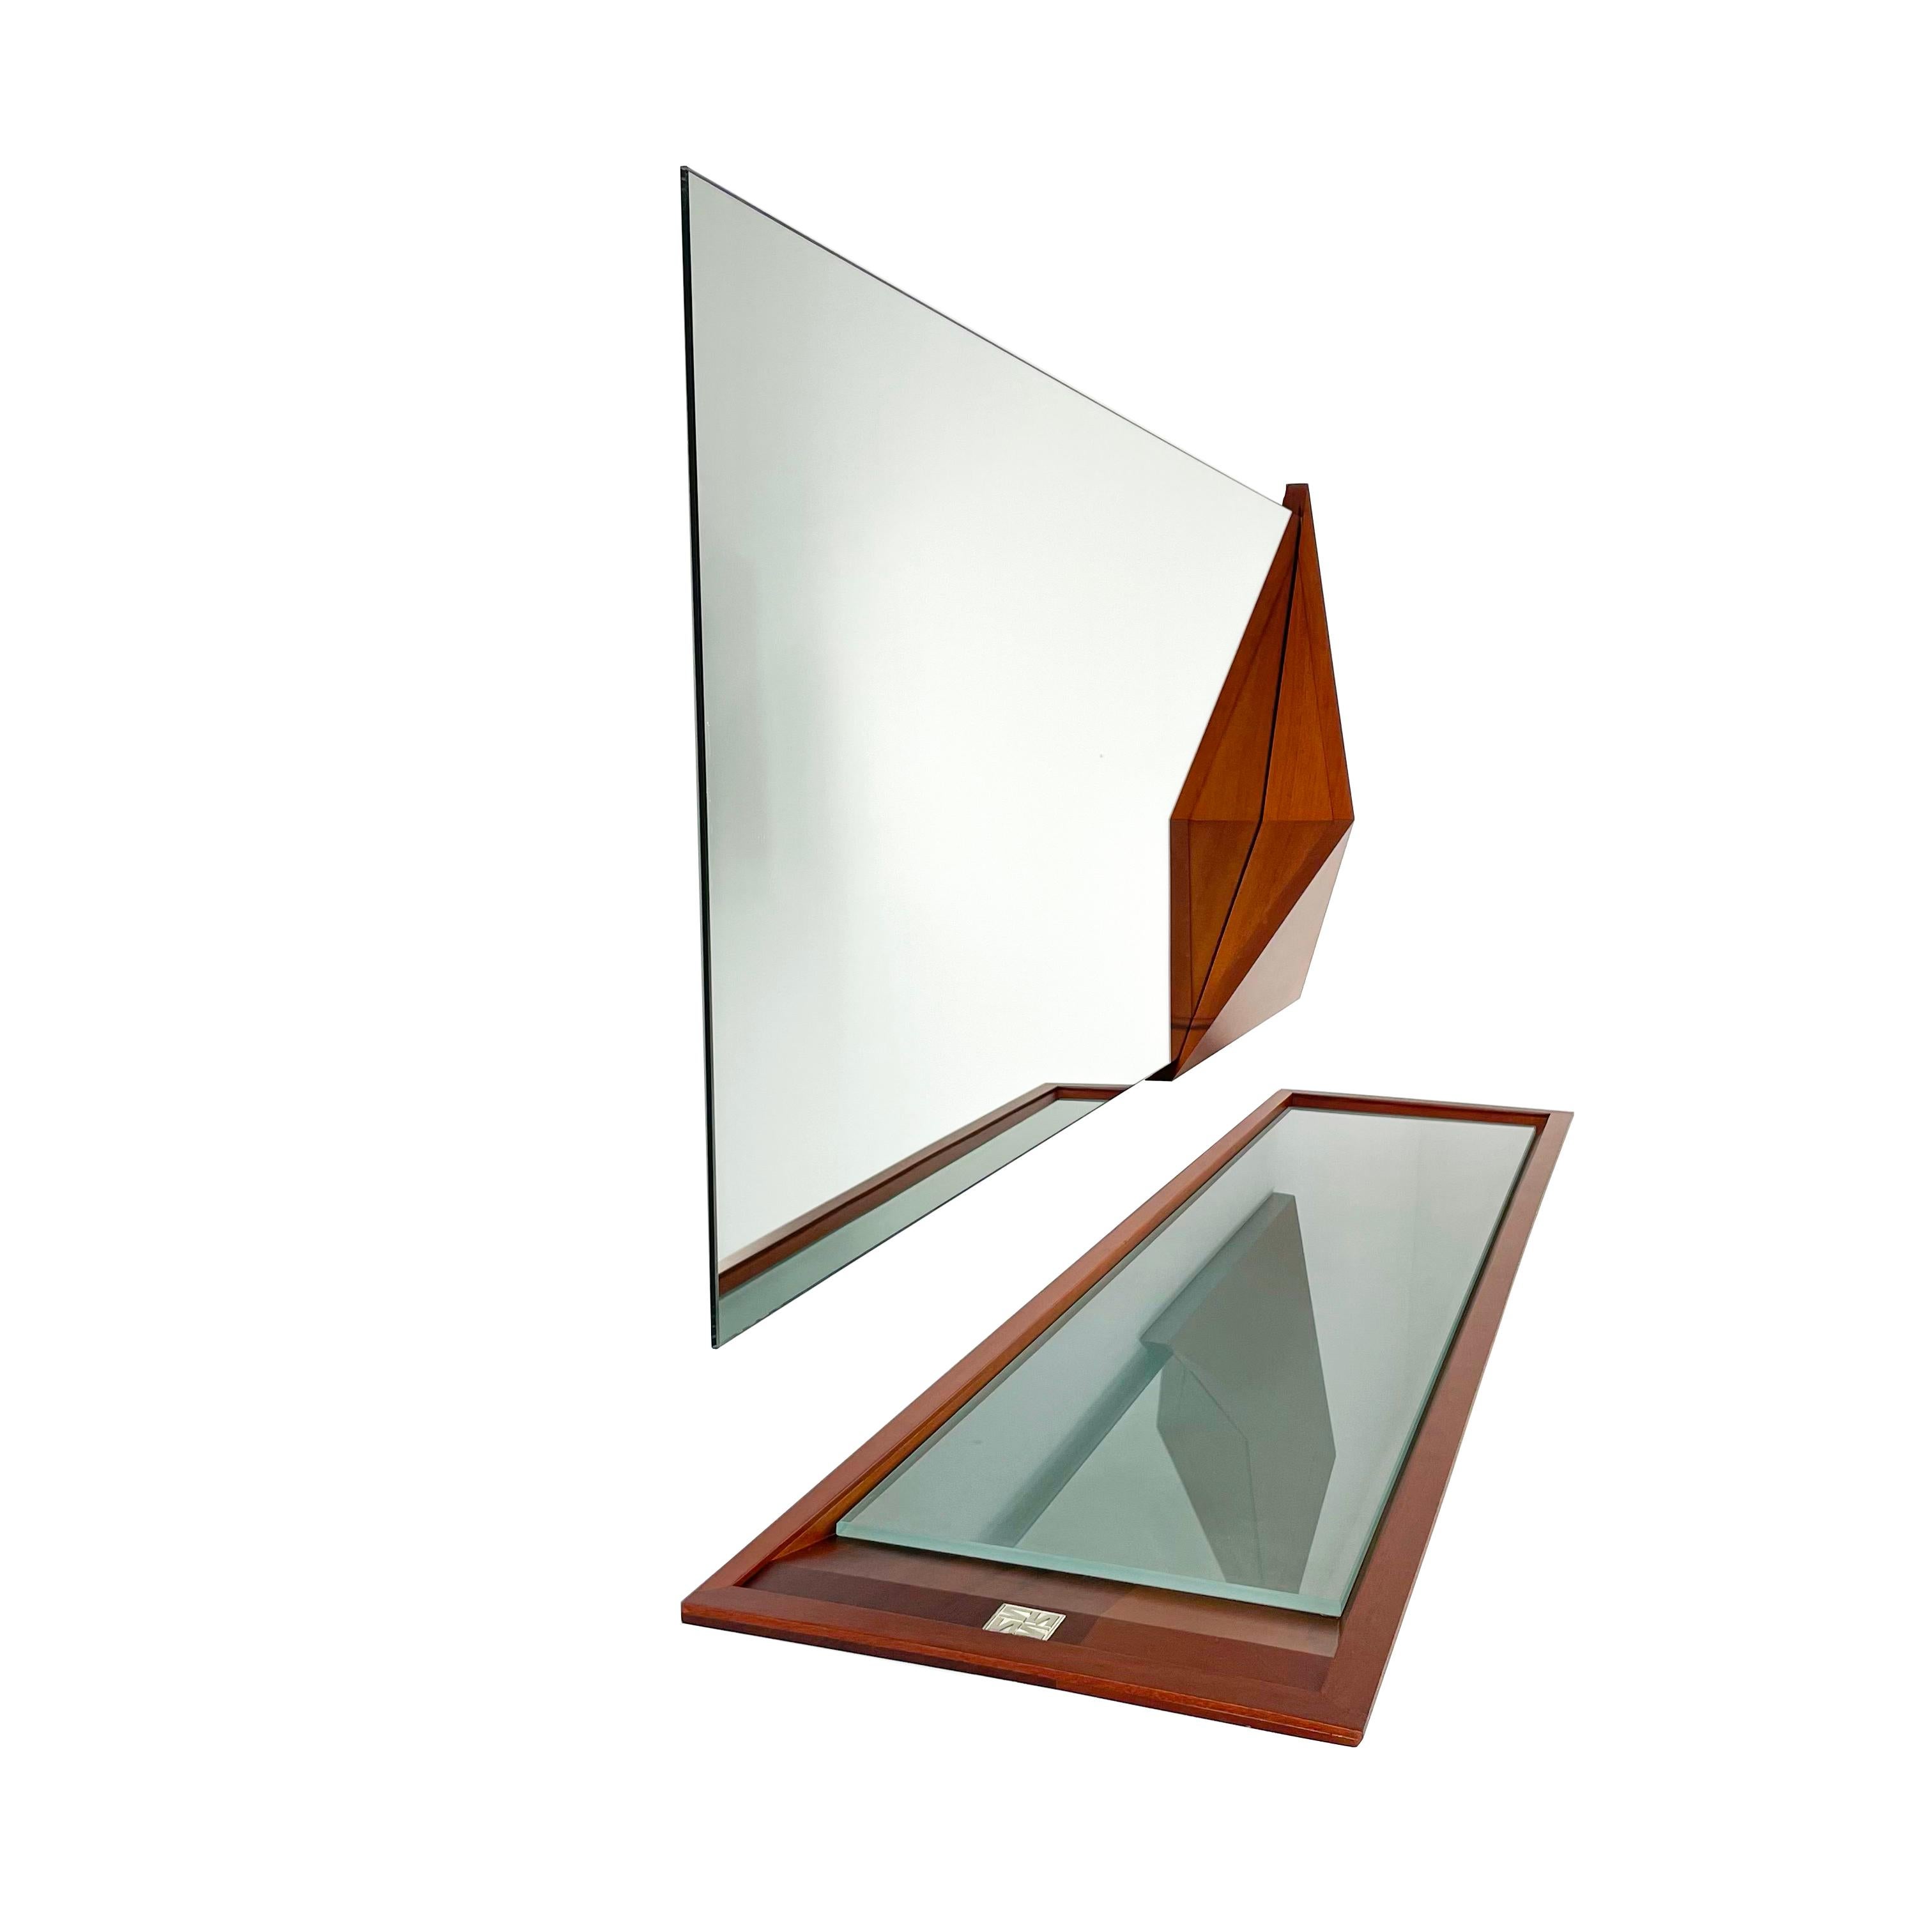 Contemporary Modern Solid Wood and Glass Entry Mirror Console by Pierre Sarkis